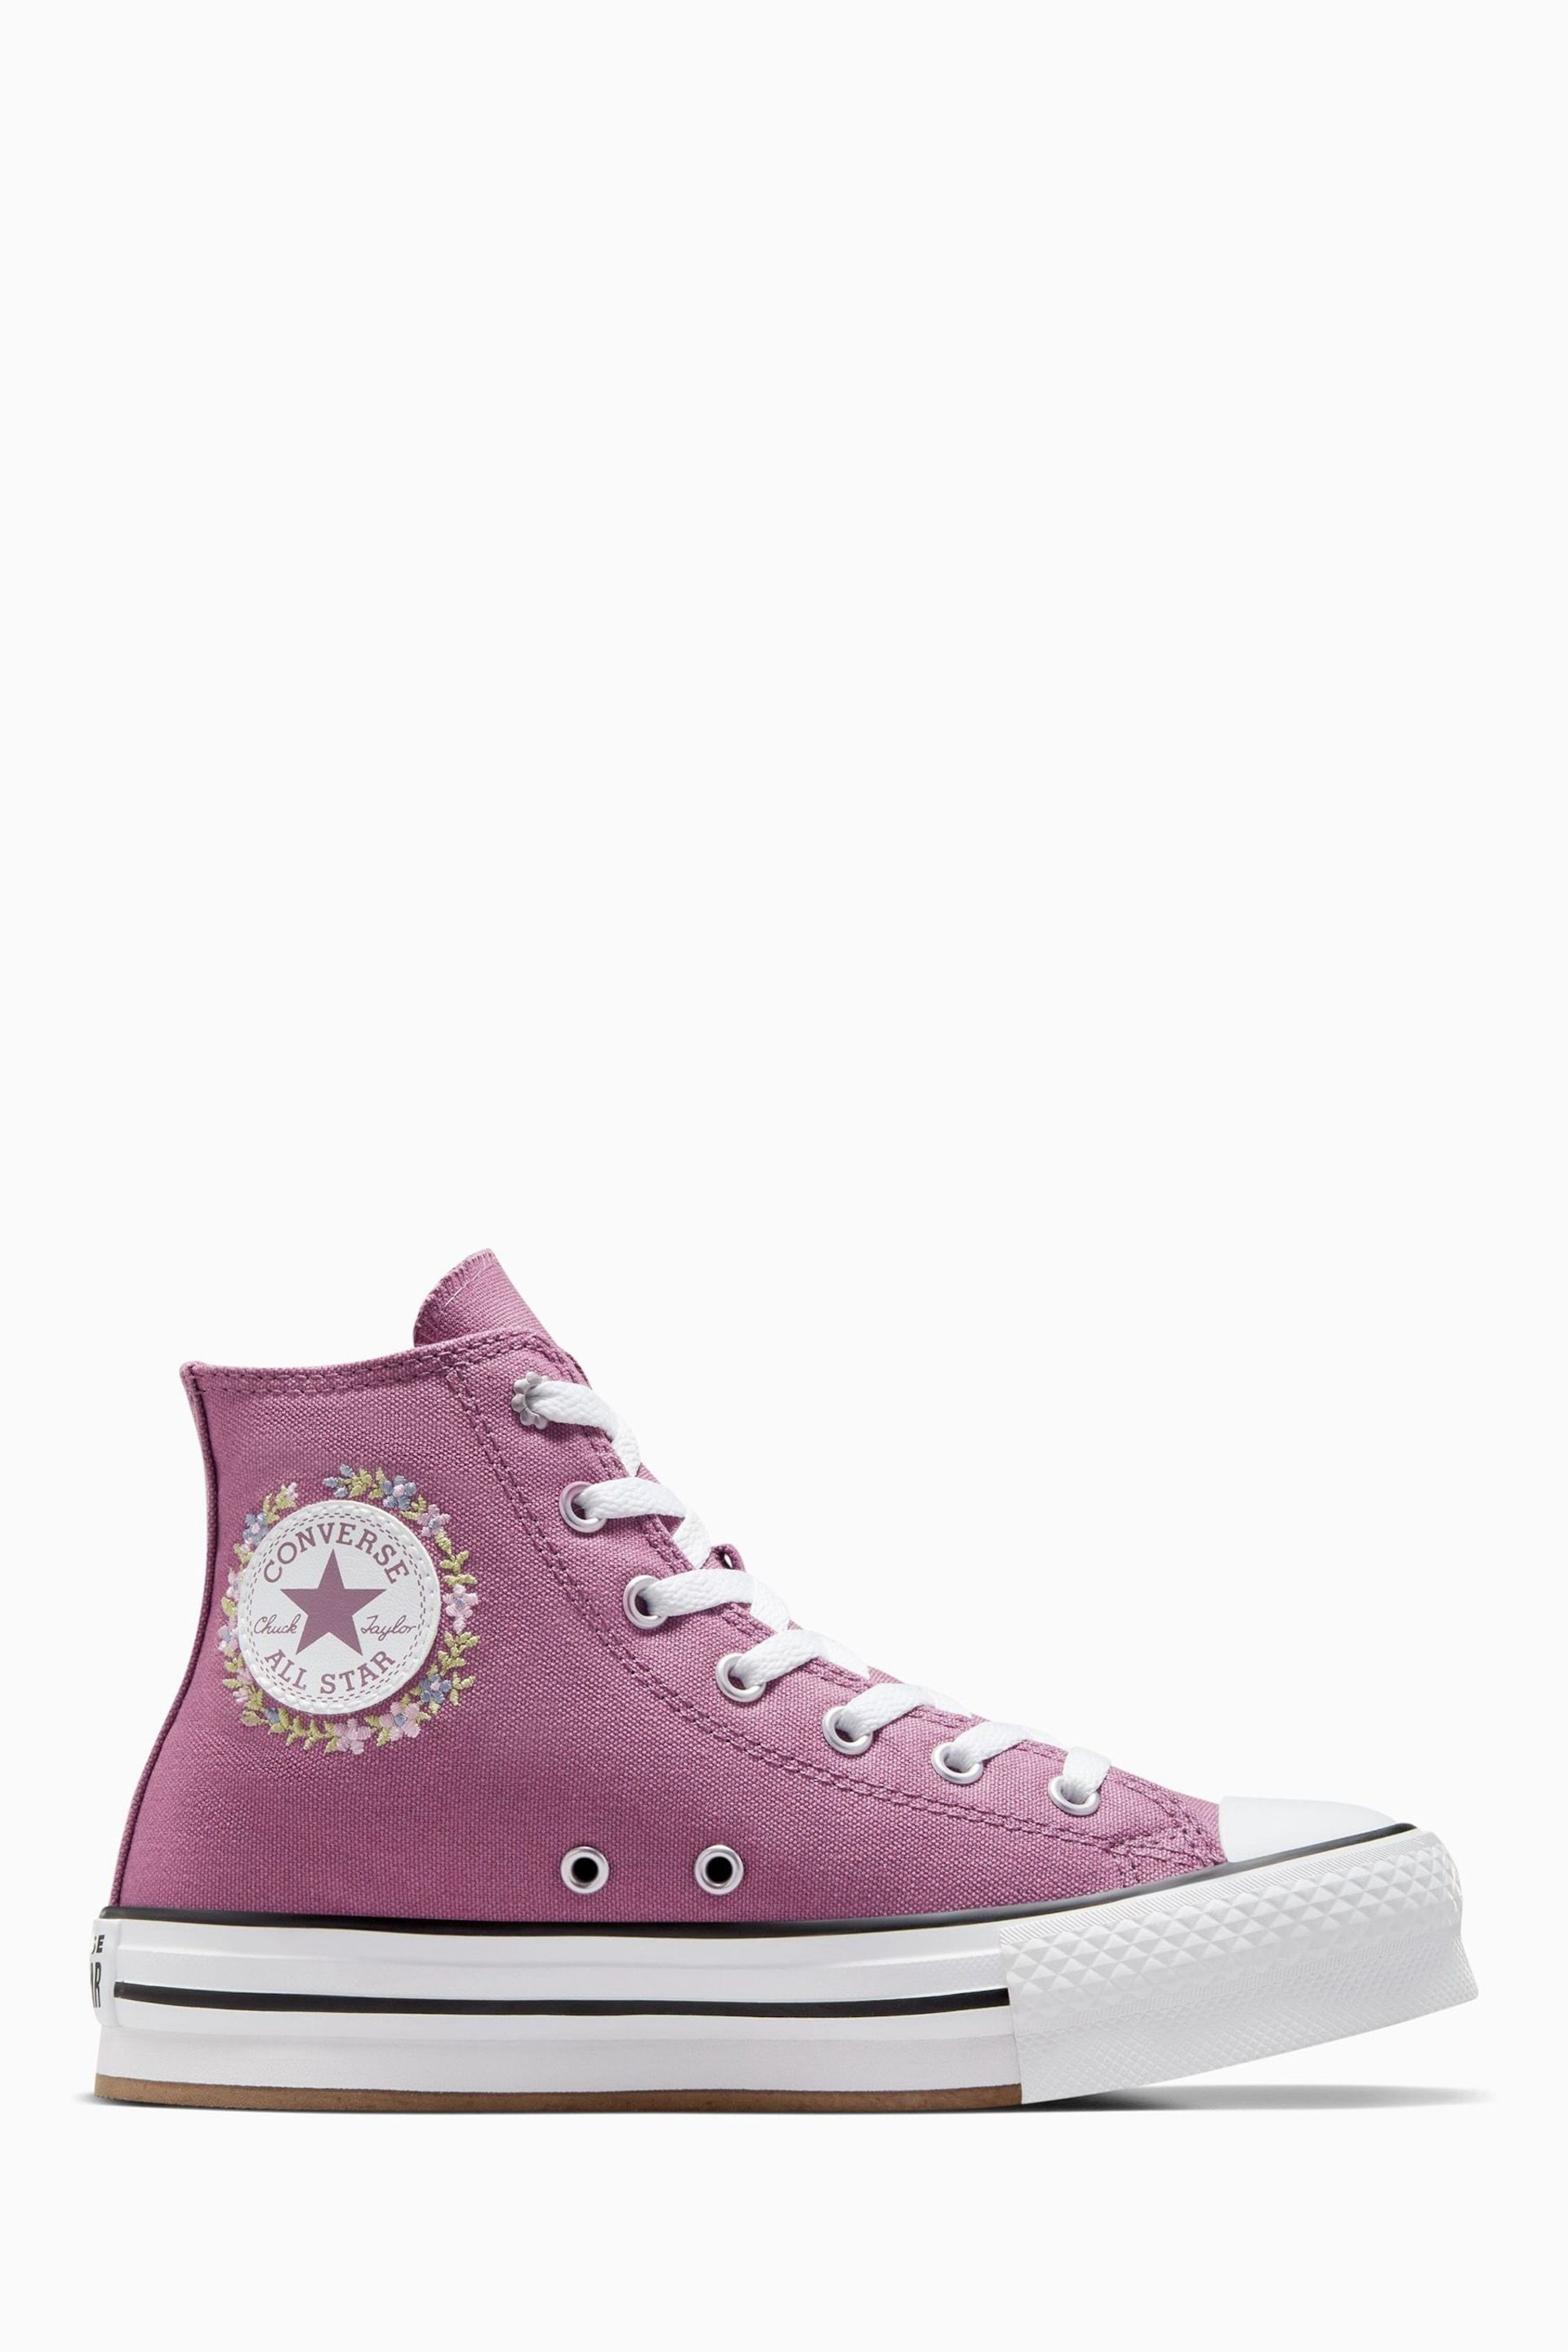 Converse Pink Youth Eva Lift Trainers - Image 1 of 10